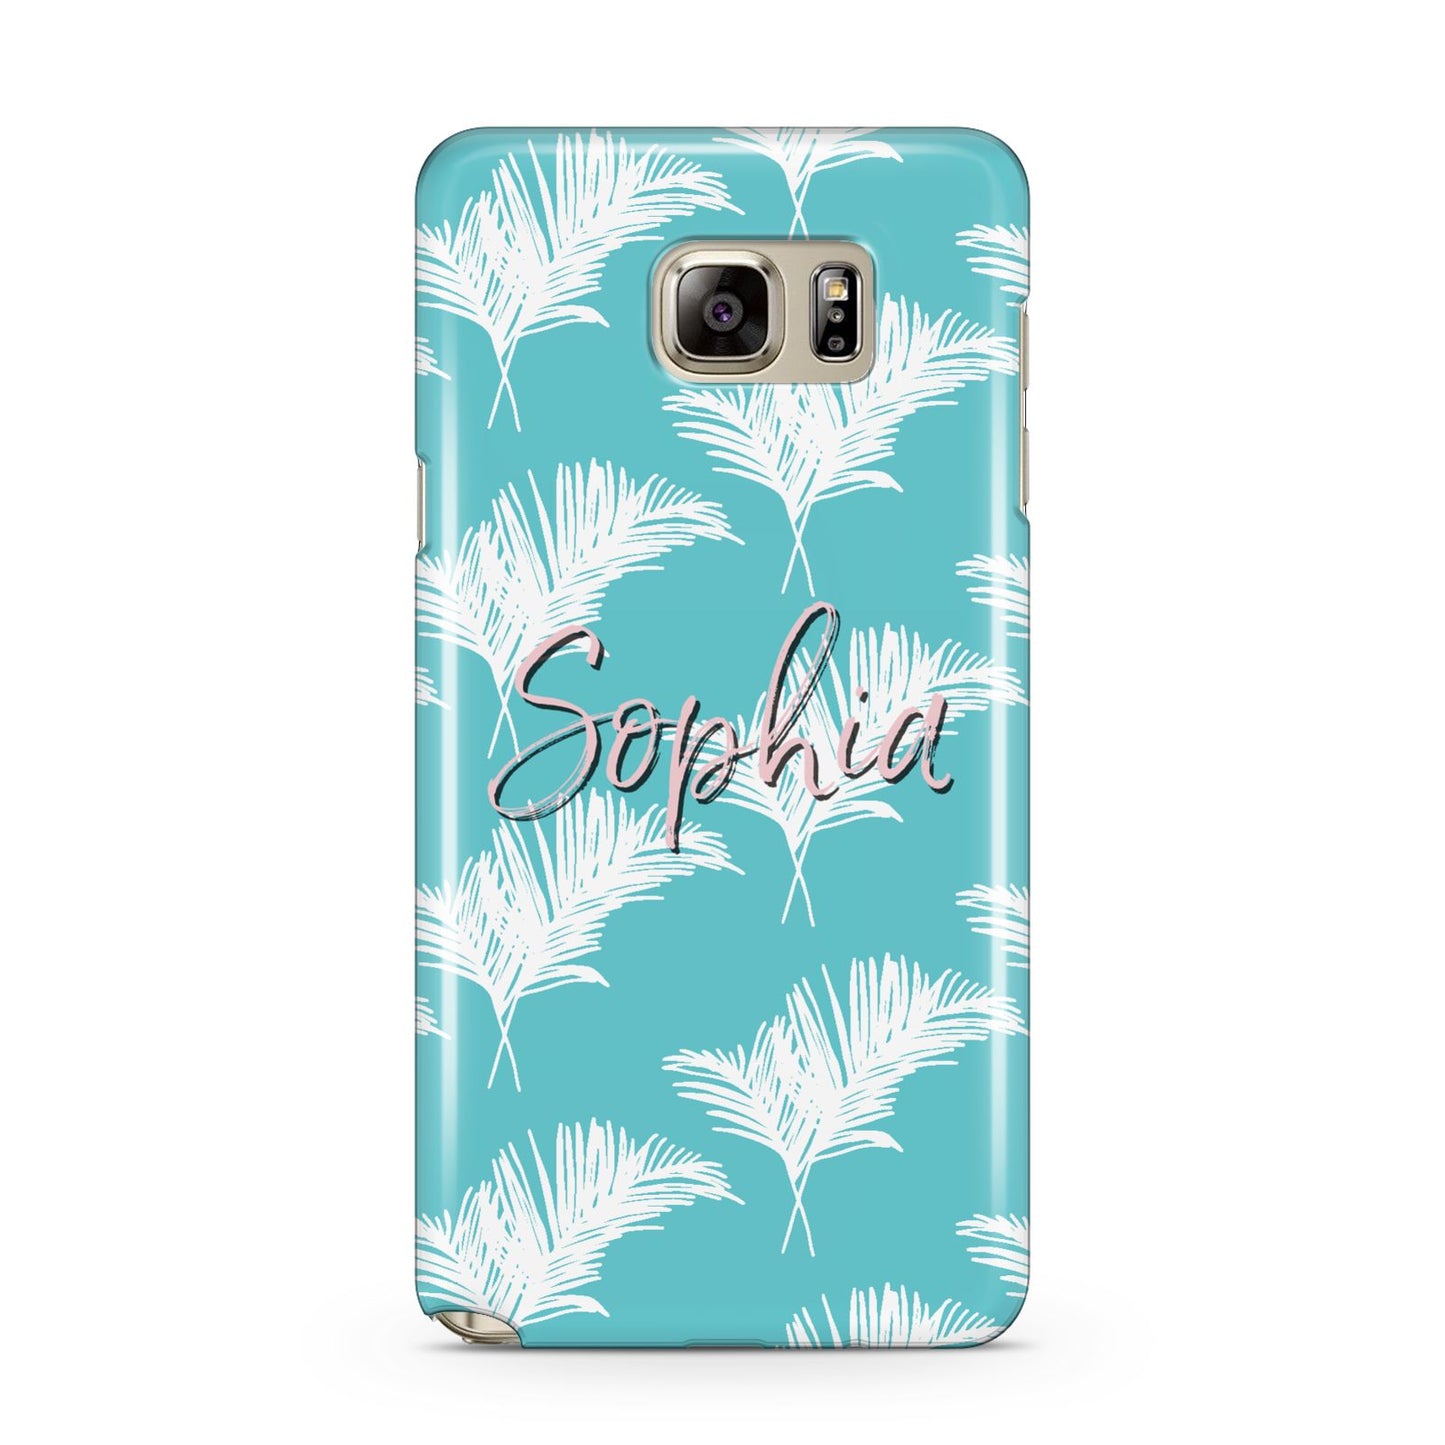 Personalised Blue White Tropical Foliage Samsung Galaxy Note 5 Case